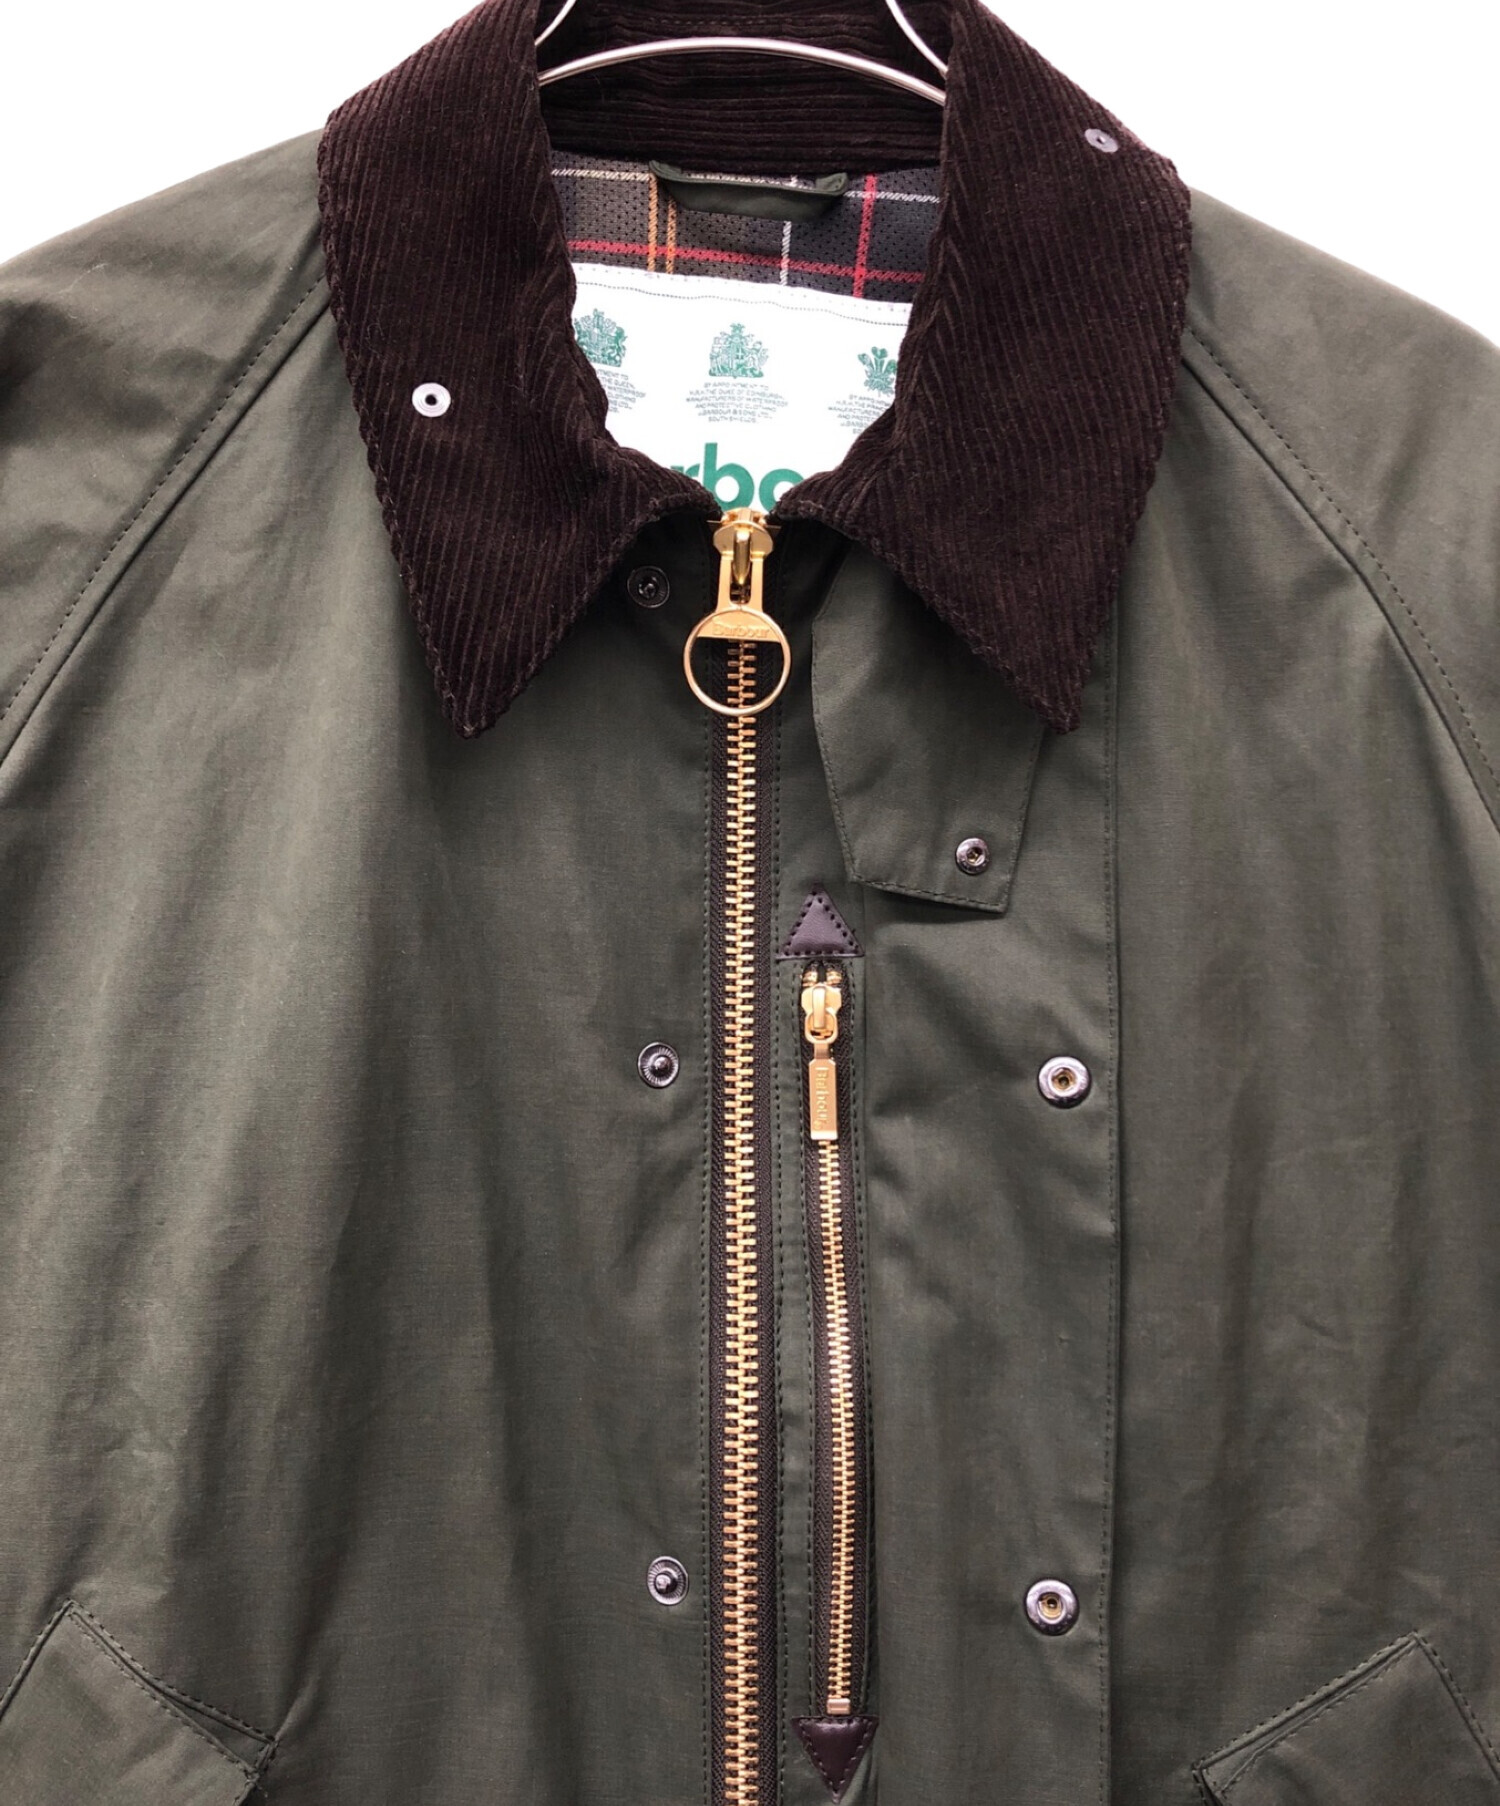 Barbour Transport Casual 381シーズン数回着用しました